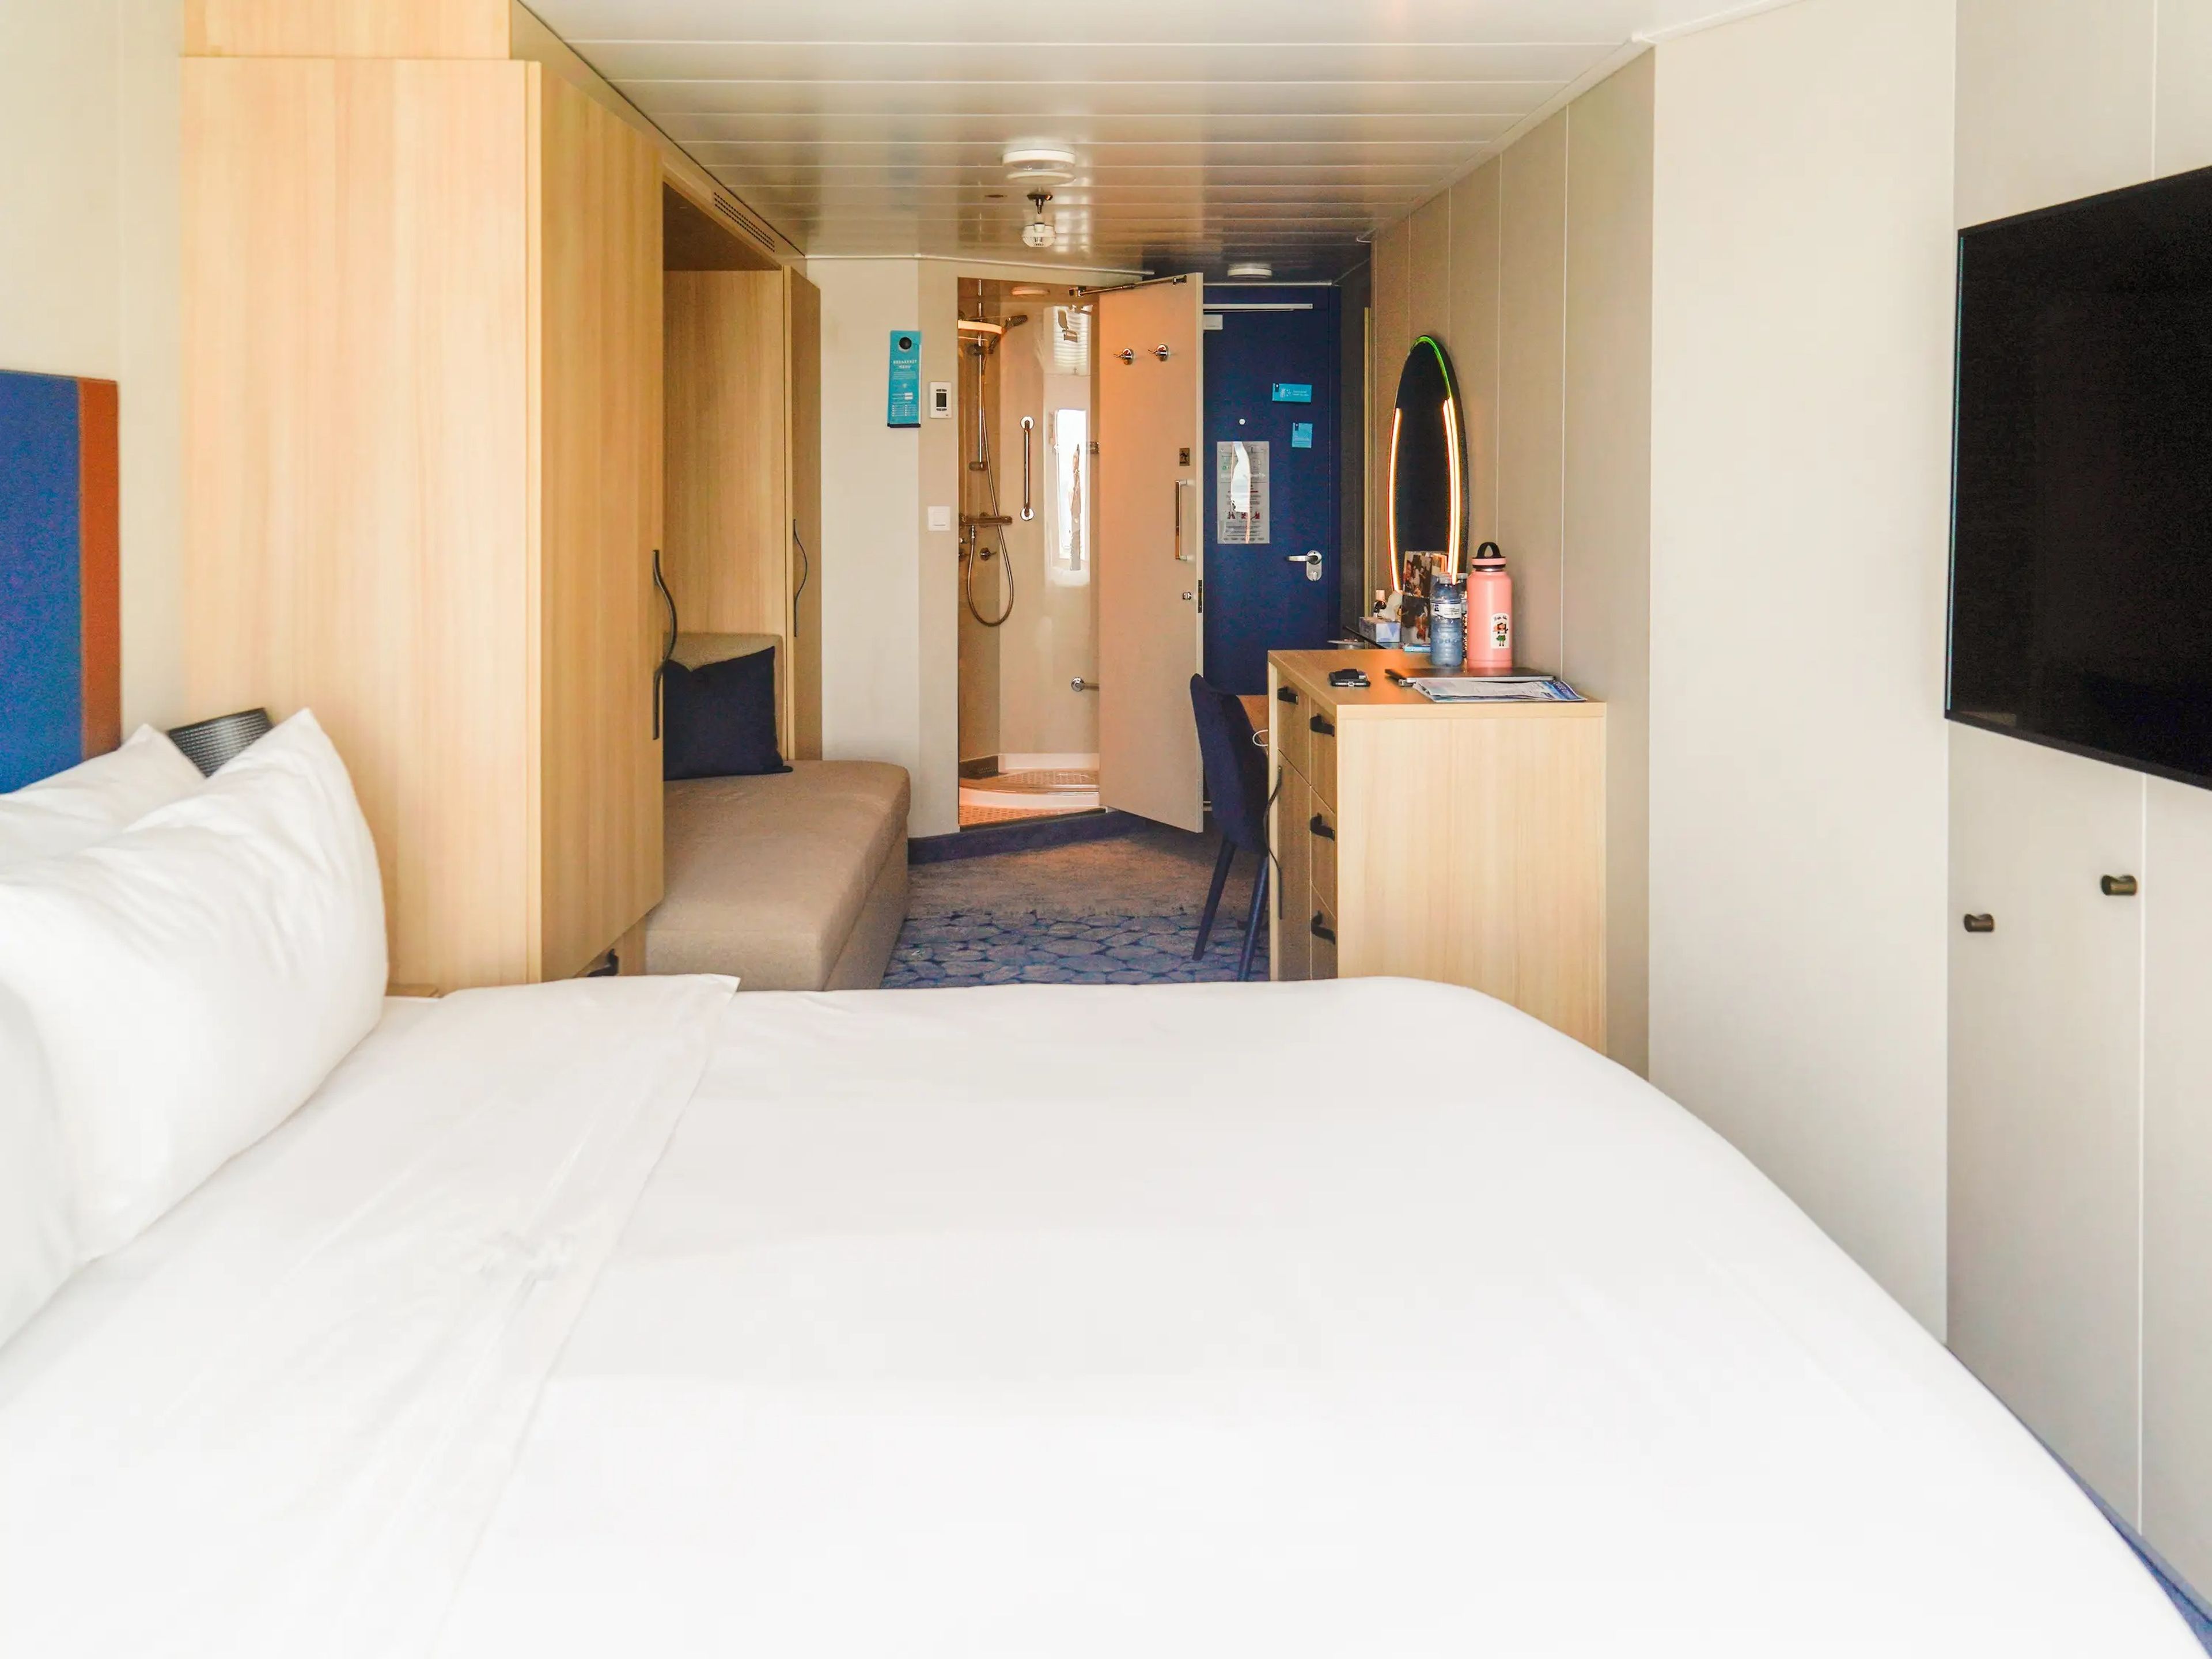 Inside a stateroom on the world's largest cruise ship